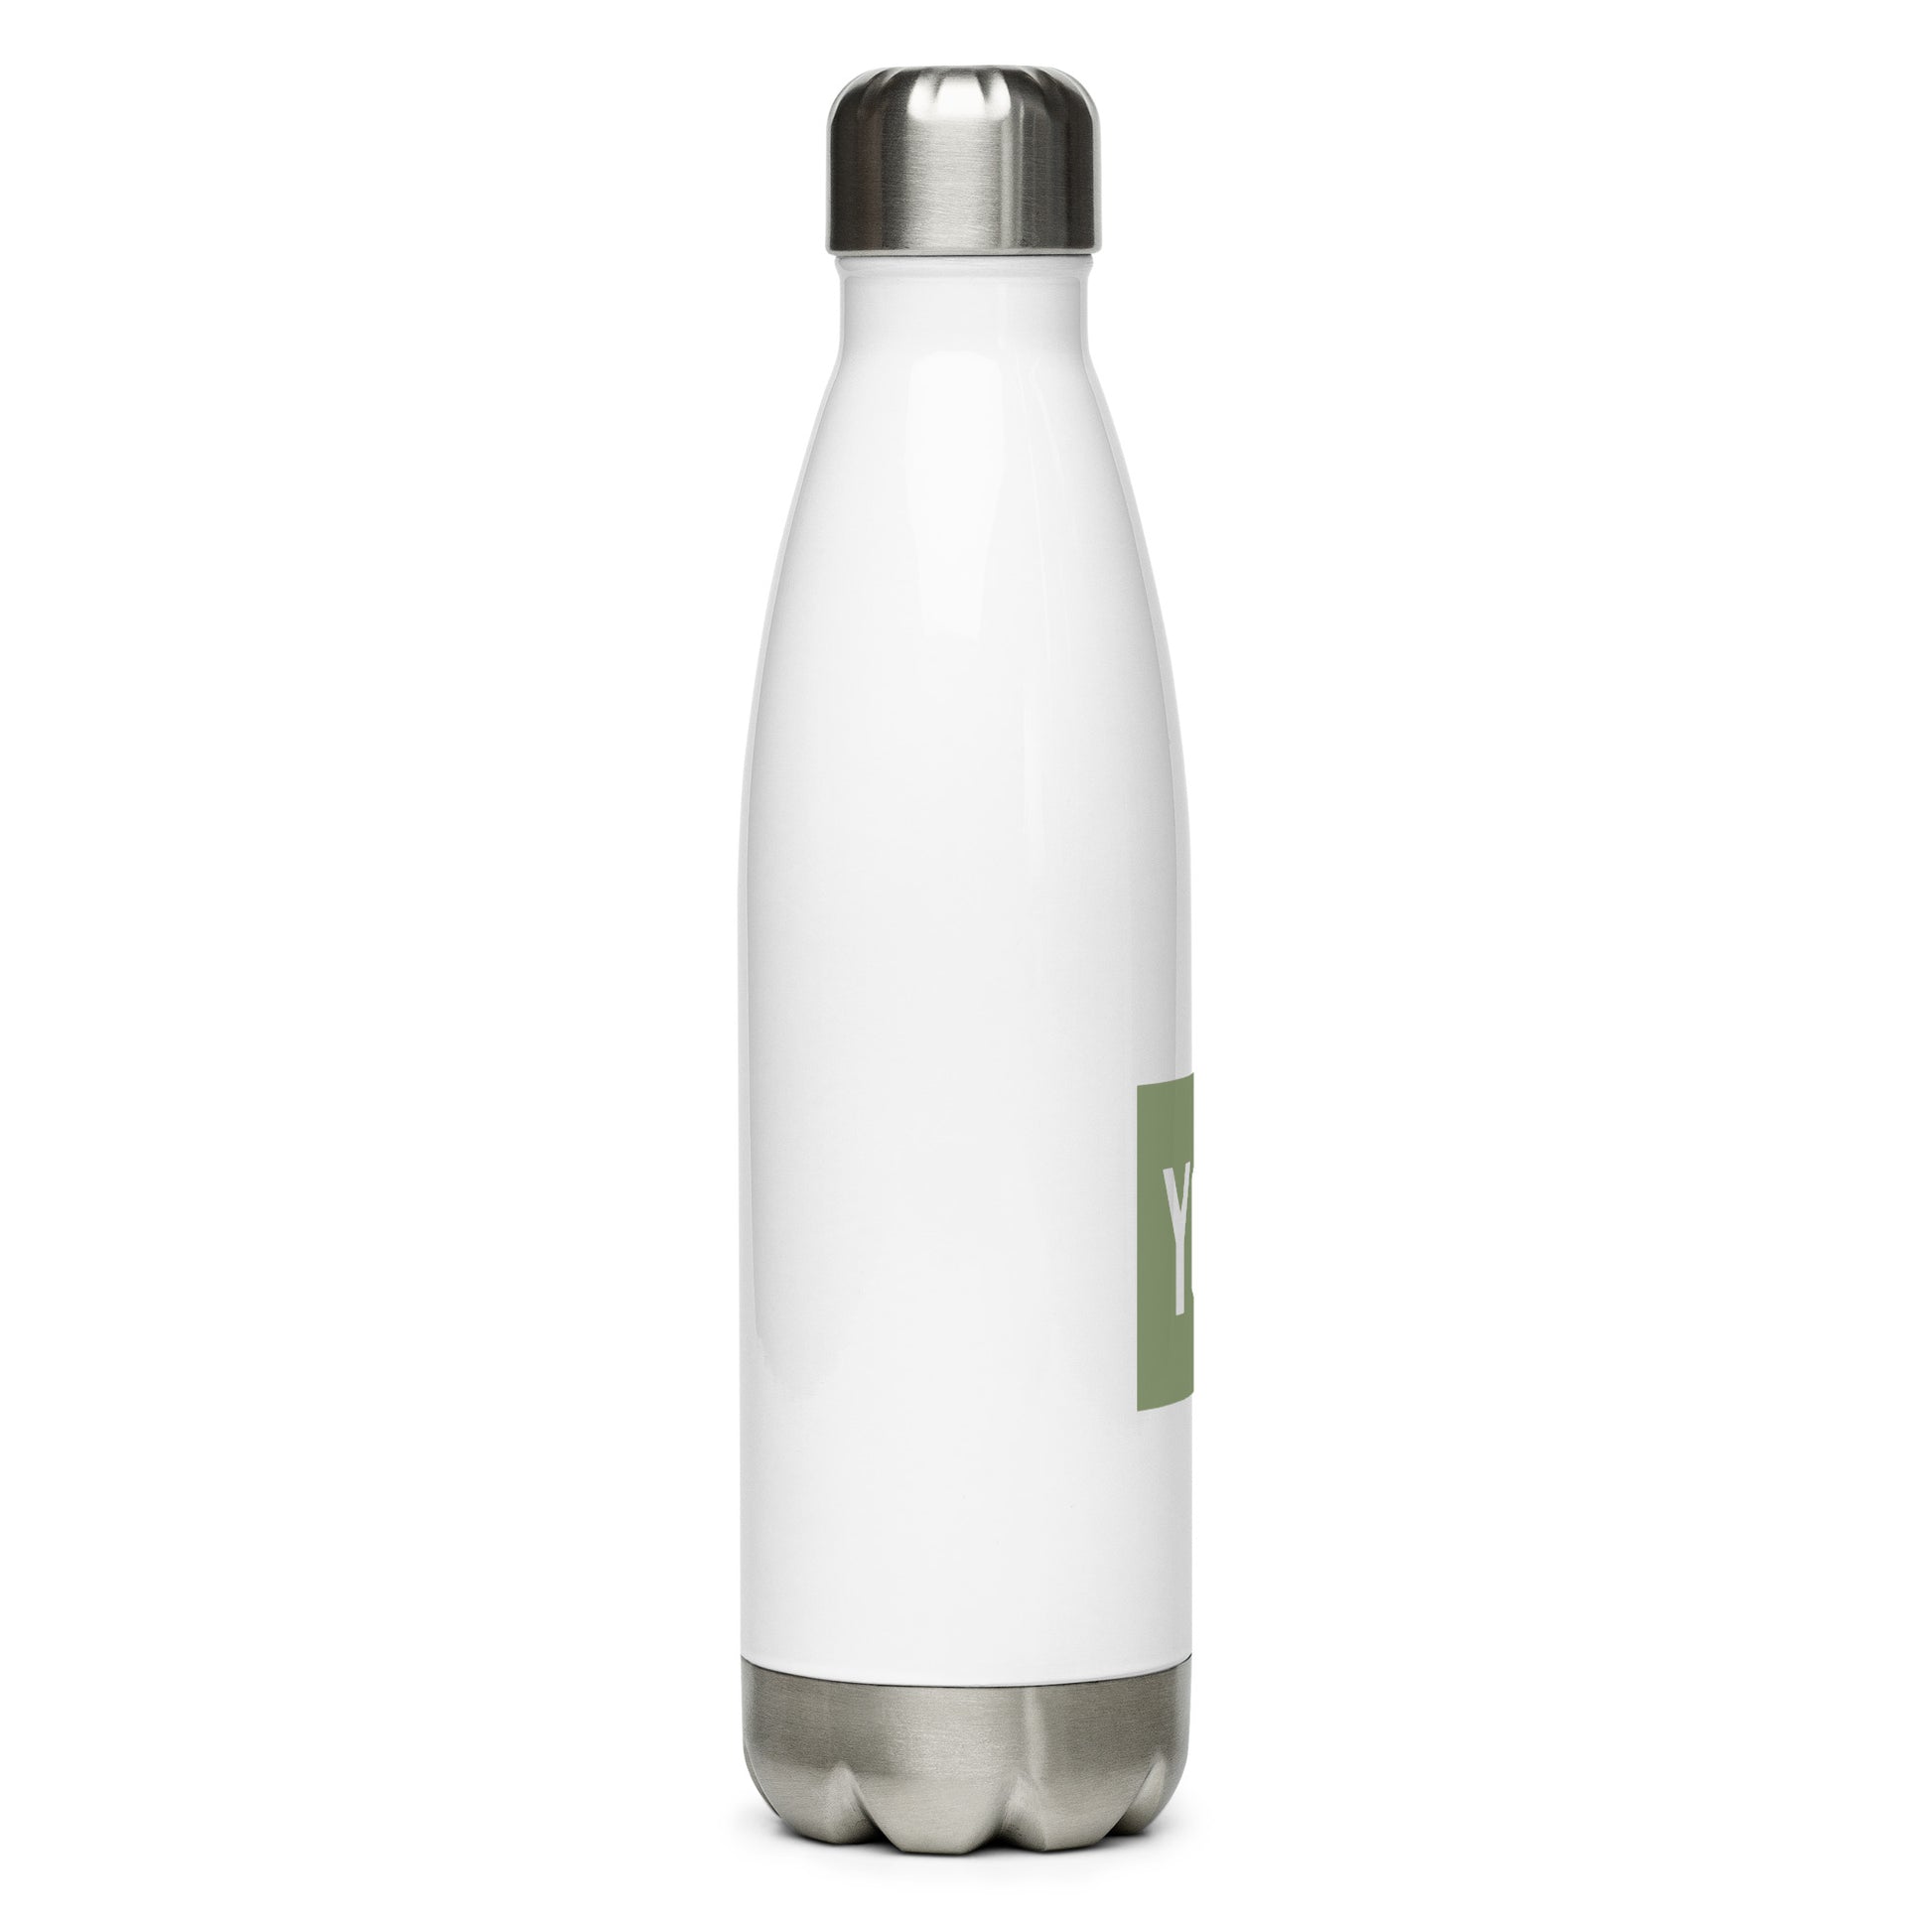 Aviation Gift Water Bottle - Camo Green • YQT Thunder Bay • YHM Designs - Image 07